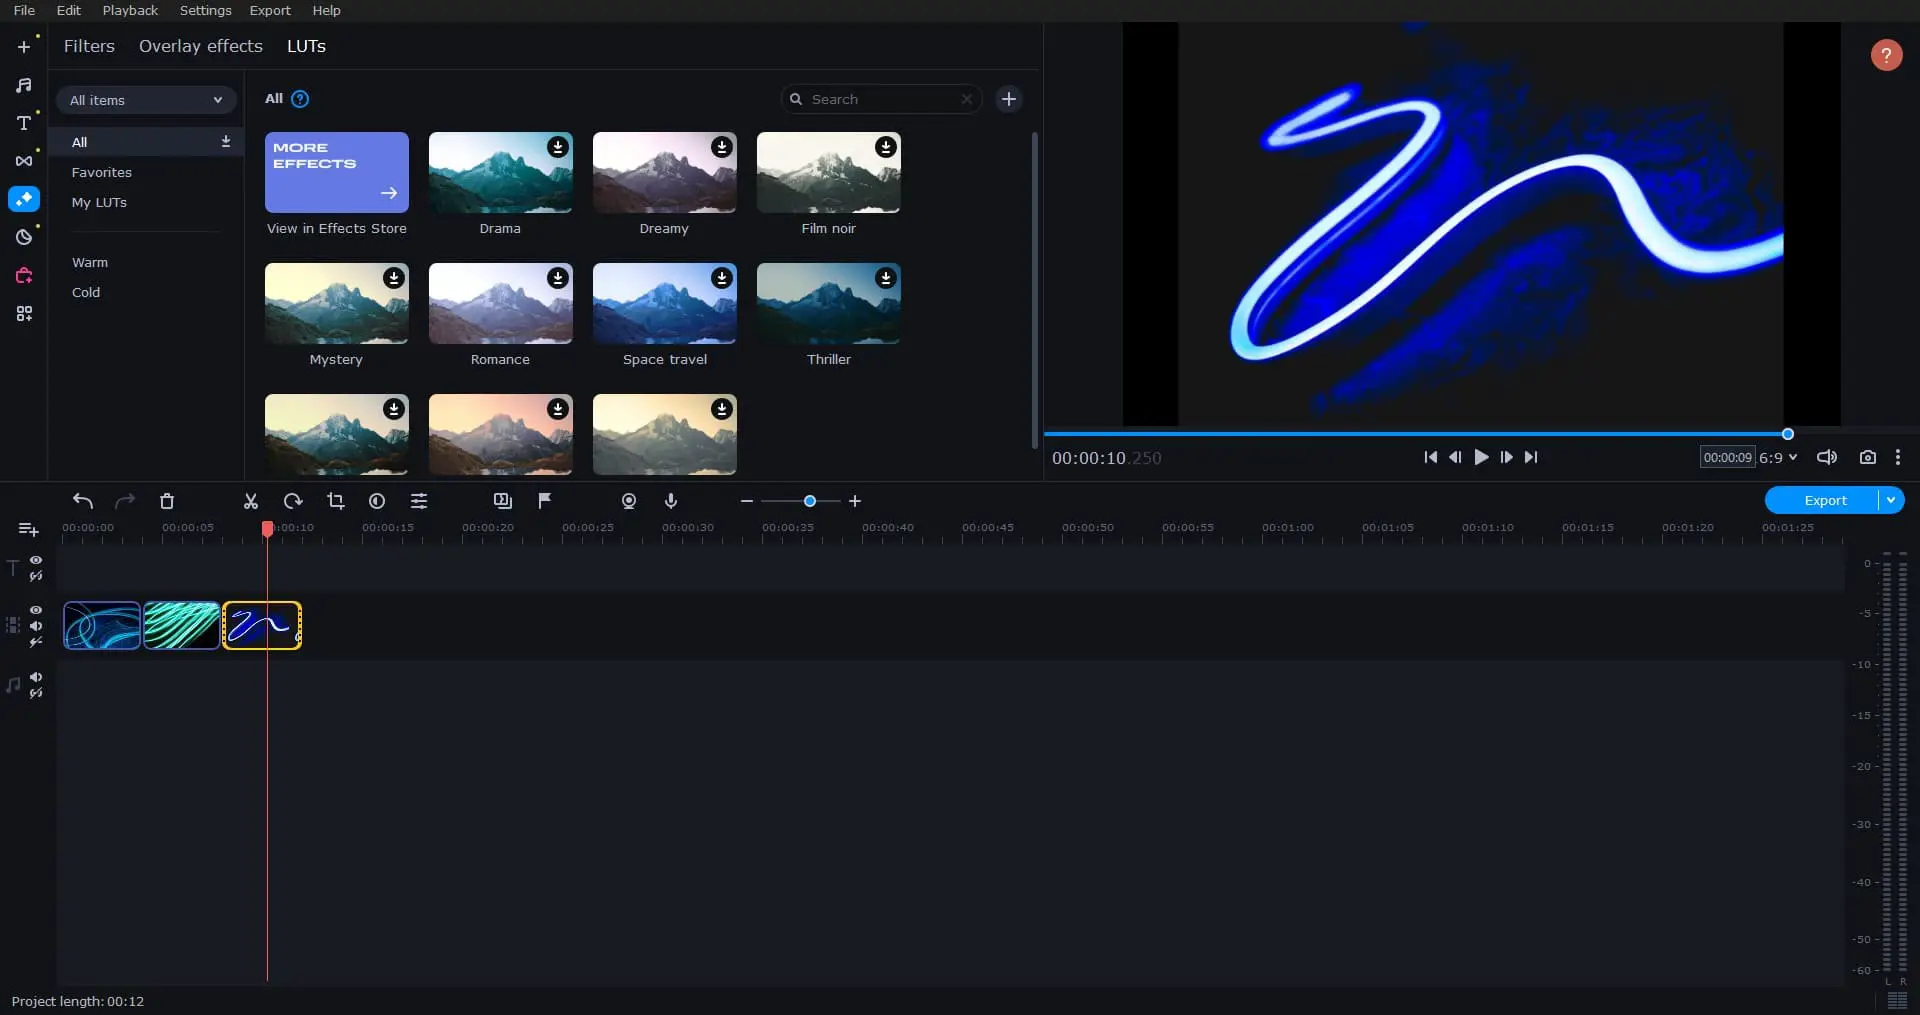 Movavi Video Editor features